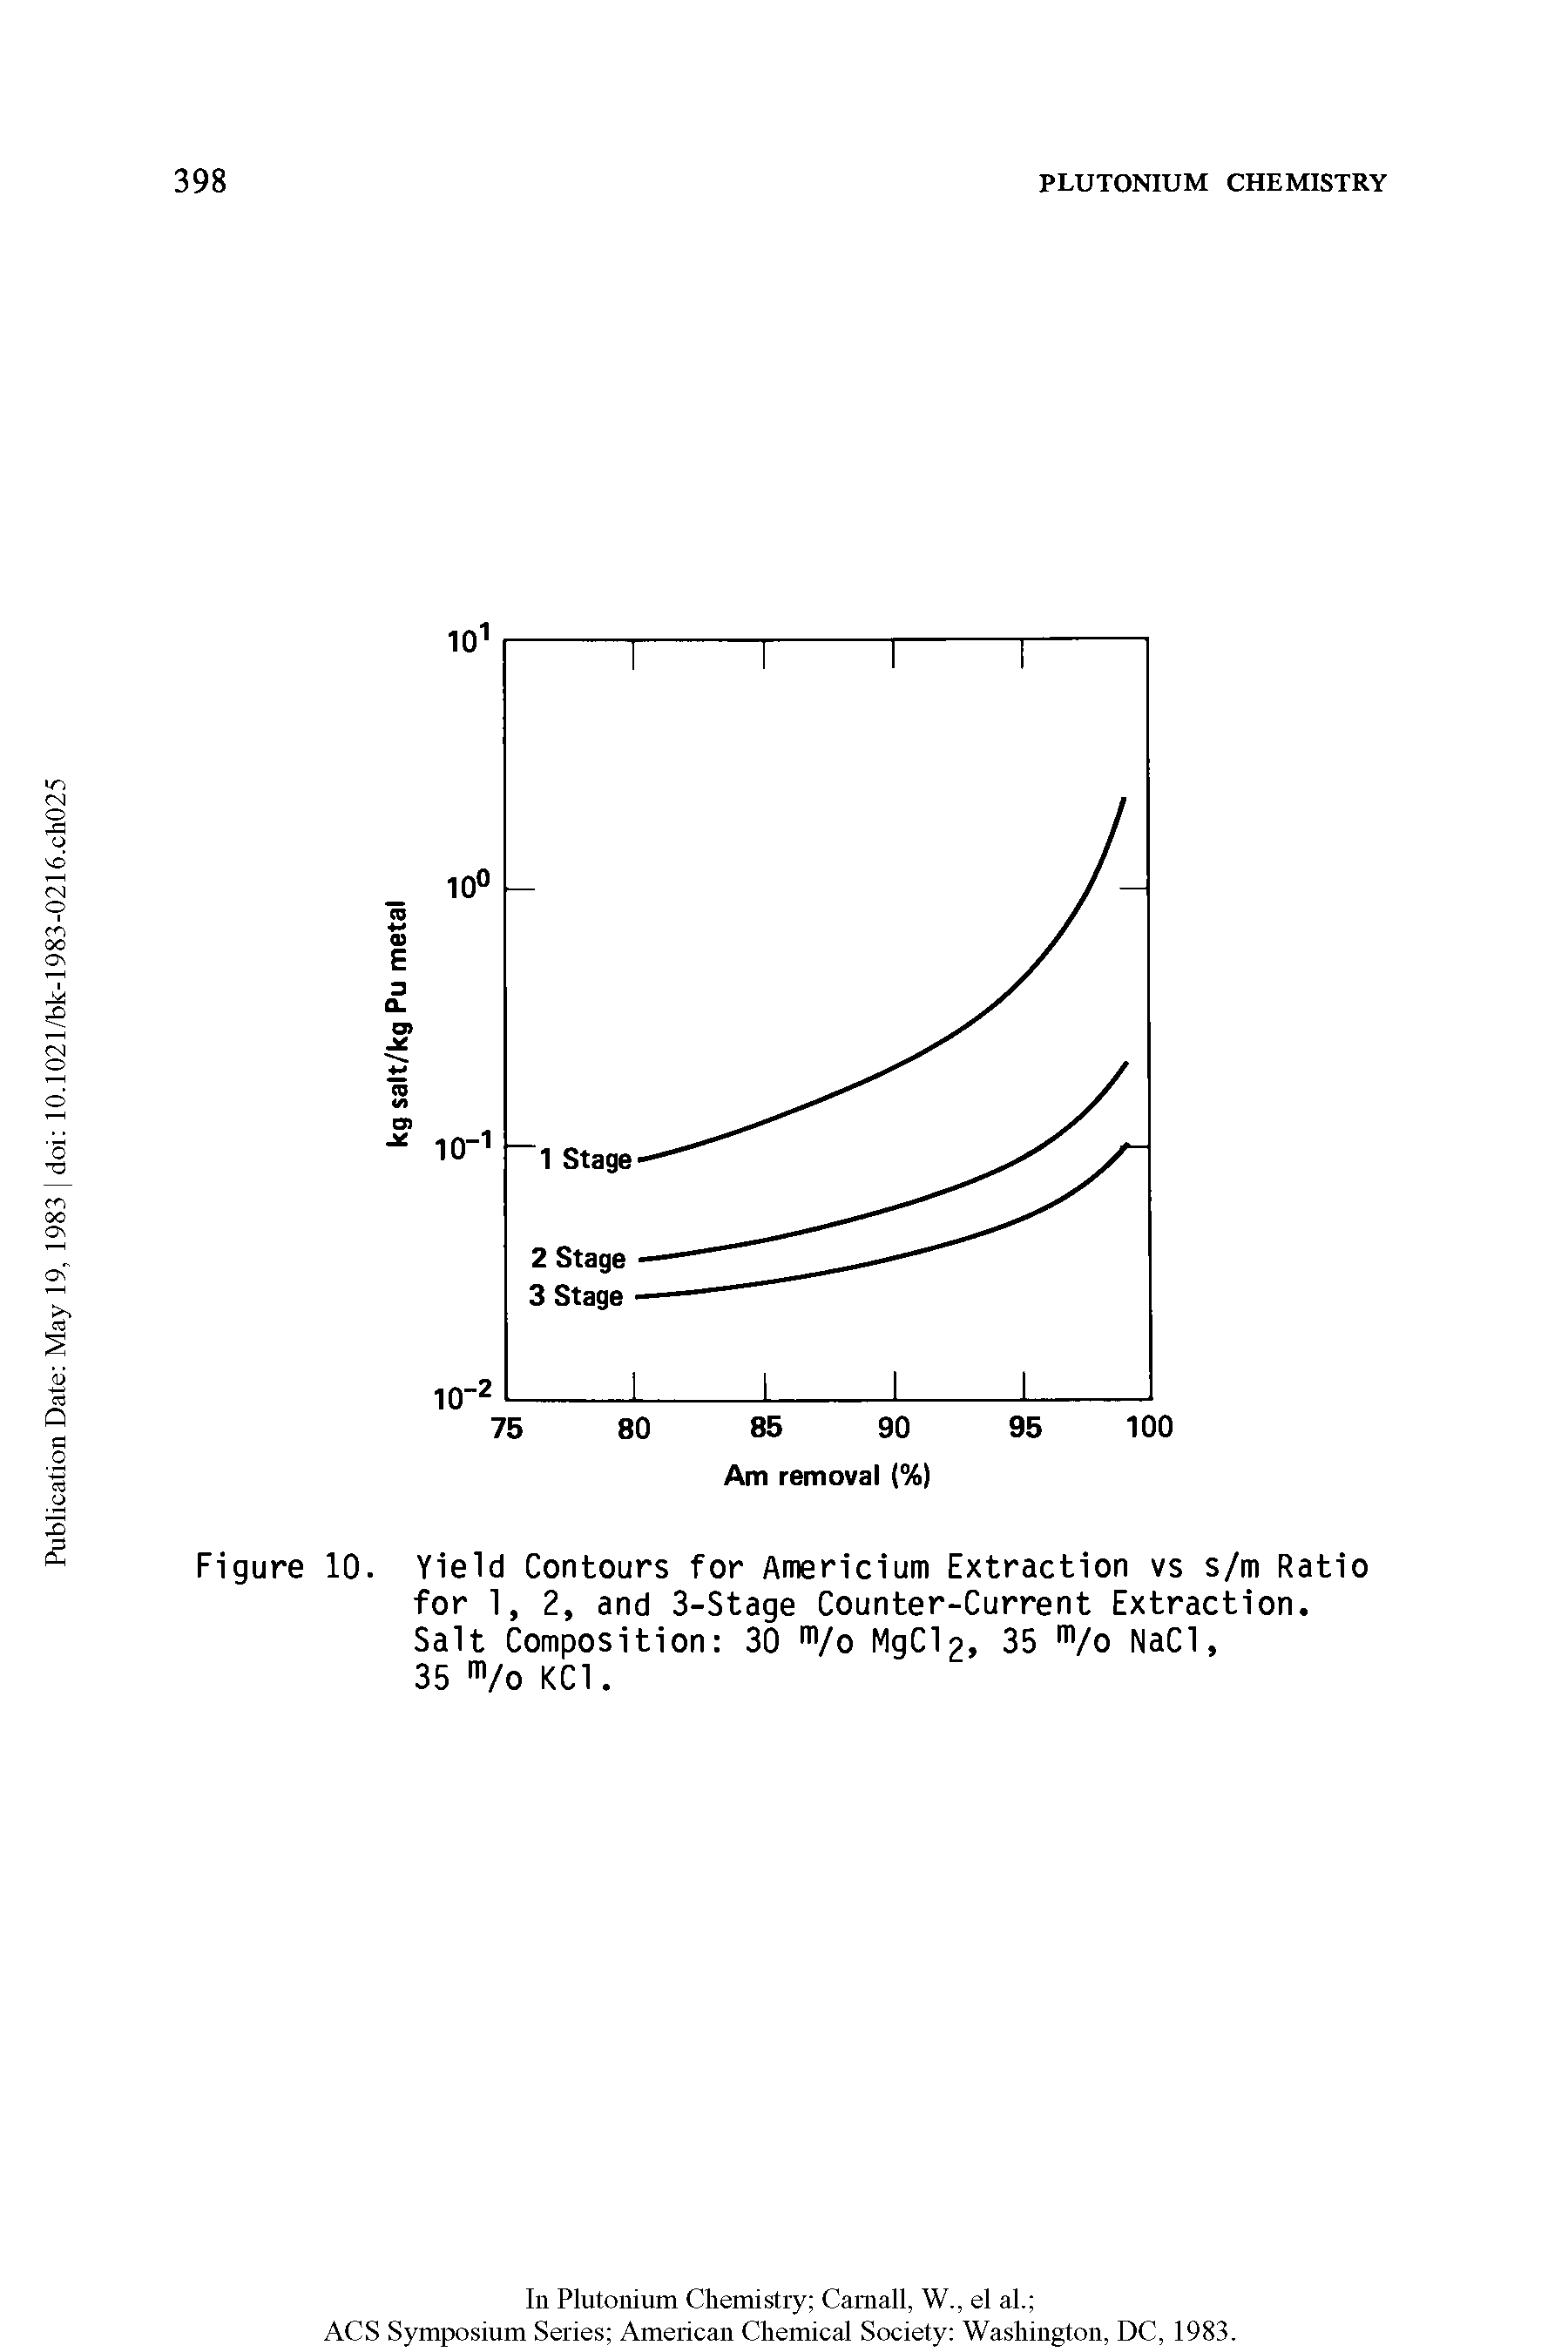 Figure 10. Yield Contours for Americium Extraction vs s/m Ratio for 1, 2, and 3-Stage Counter-Current Extraction. Salt Composition 30 m/o MgCl2, 35 m/o NaCl,...